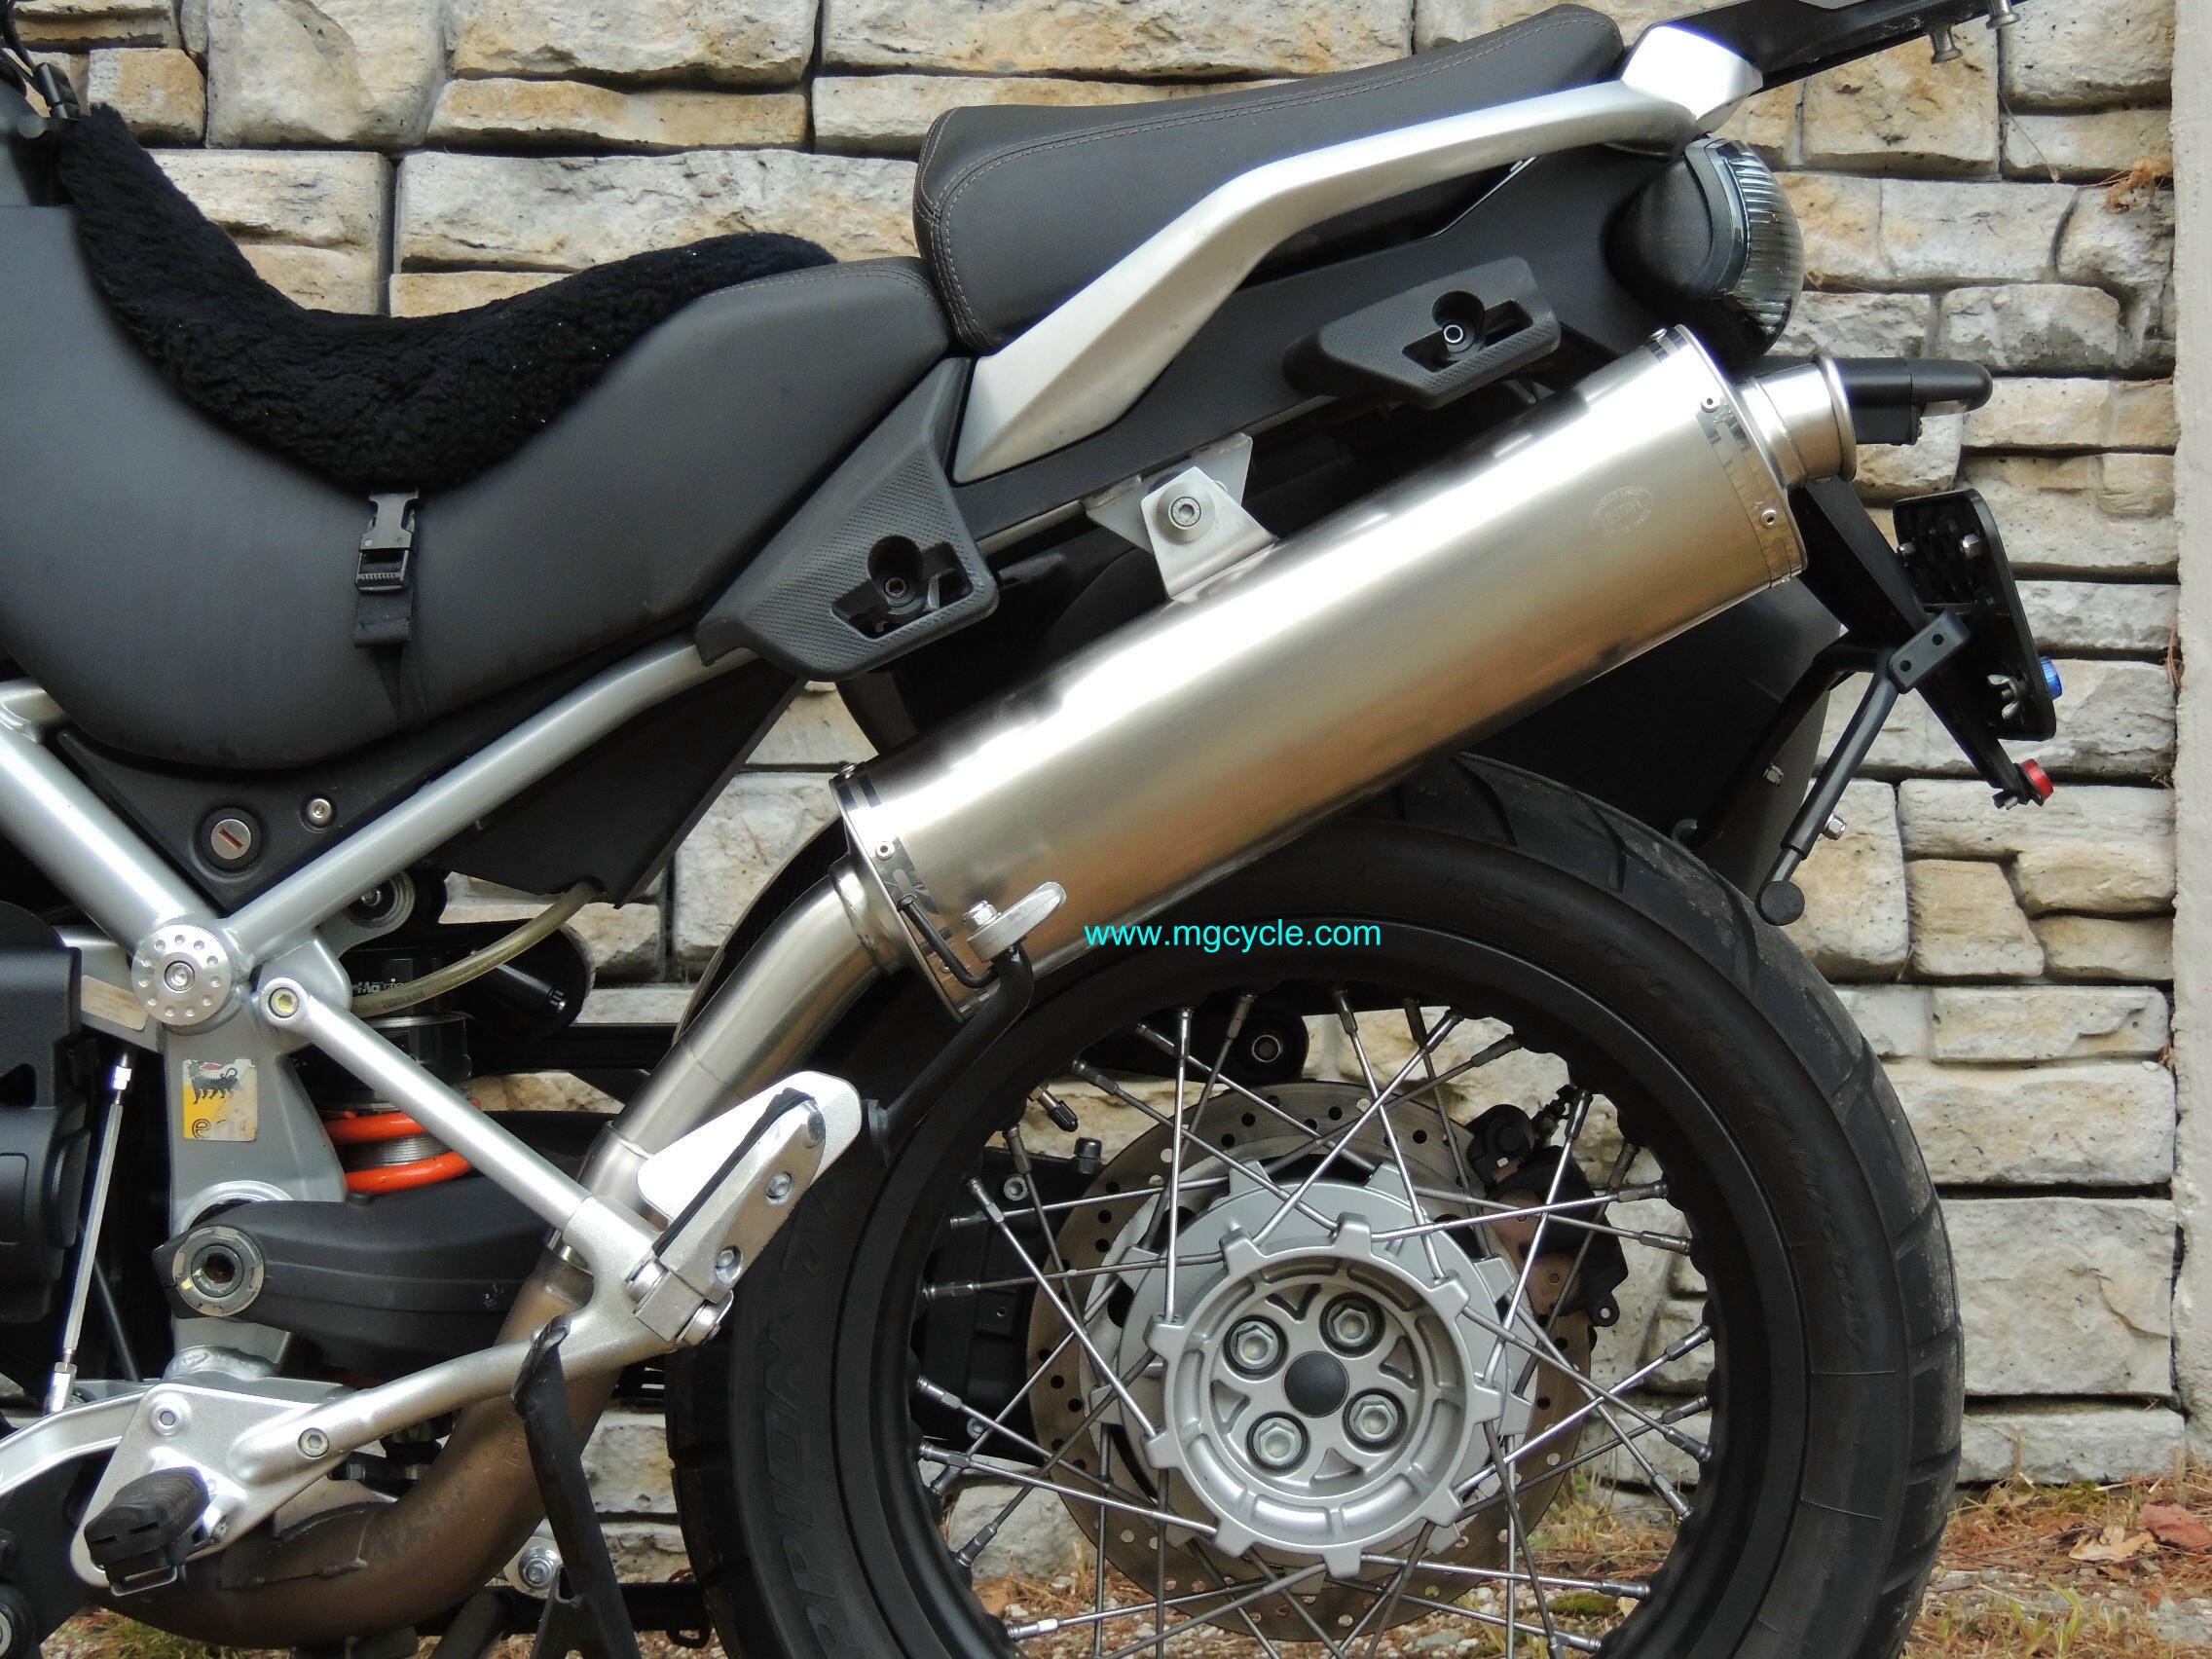 Mistral ICE GREY stainless steel oval muffler for Stelvio & NTX